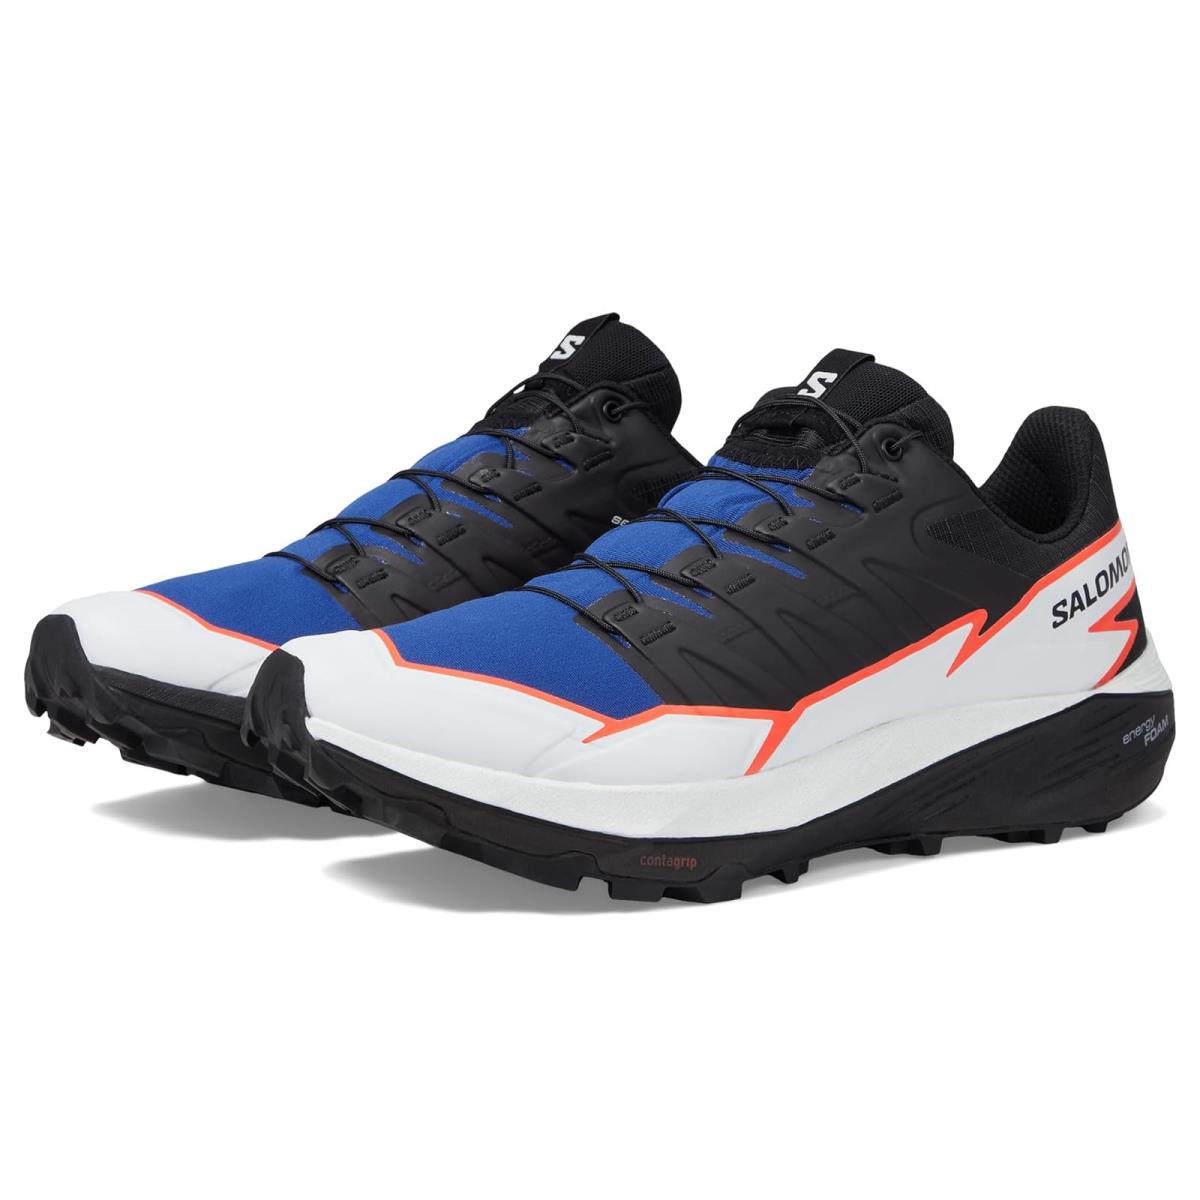 Man`s Sneakers Athletic Shoes Salomon Thundercross Surf The Web/Black/Fiery Coral